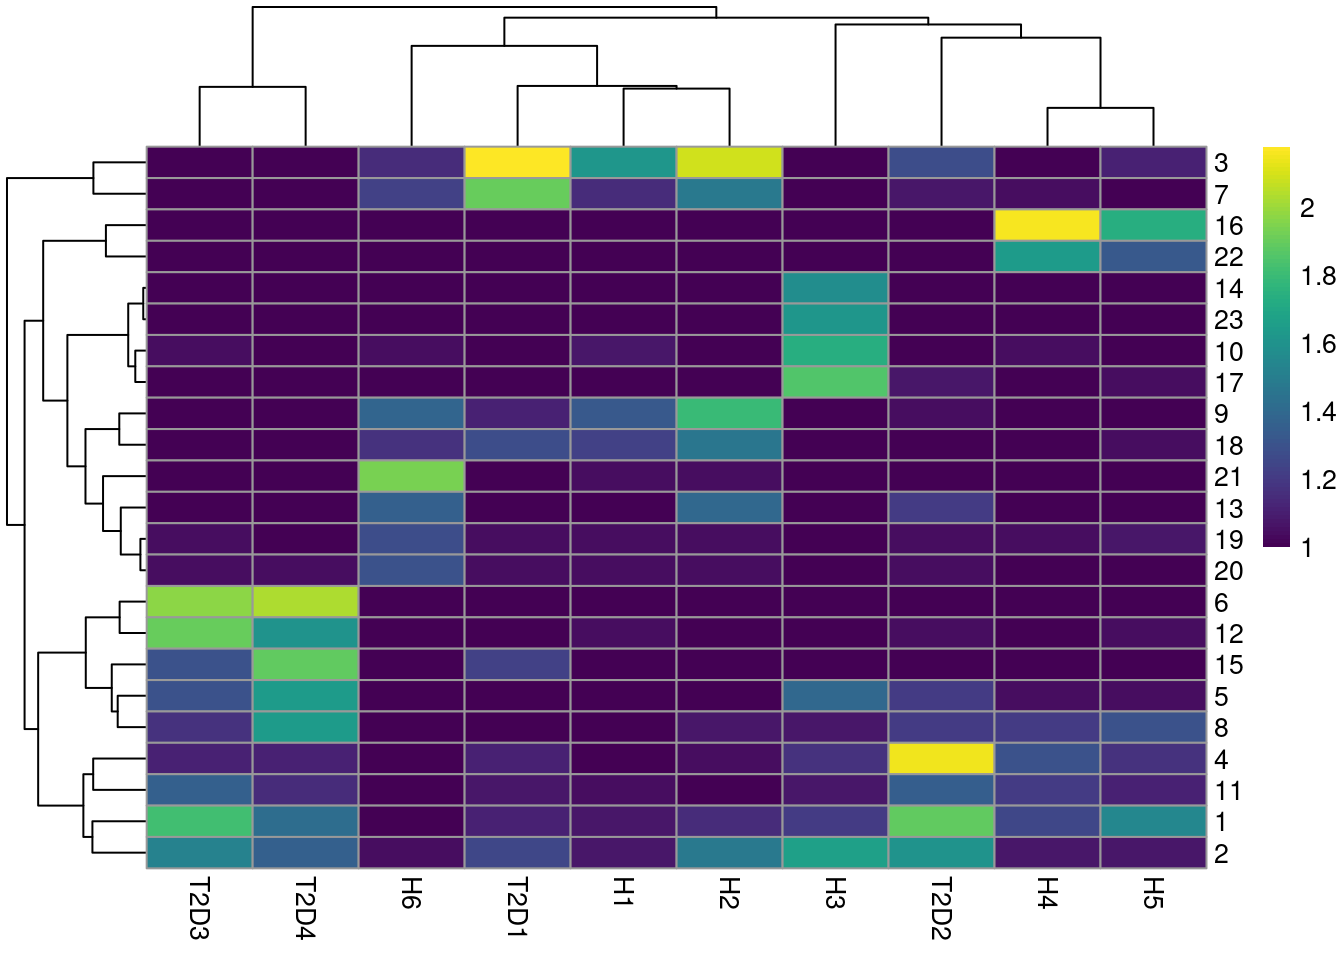 Heatmap of the frequency of cells from each donor in each cluster.